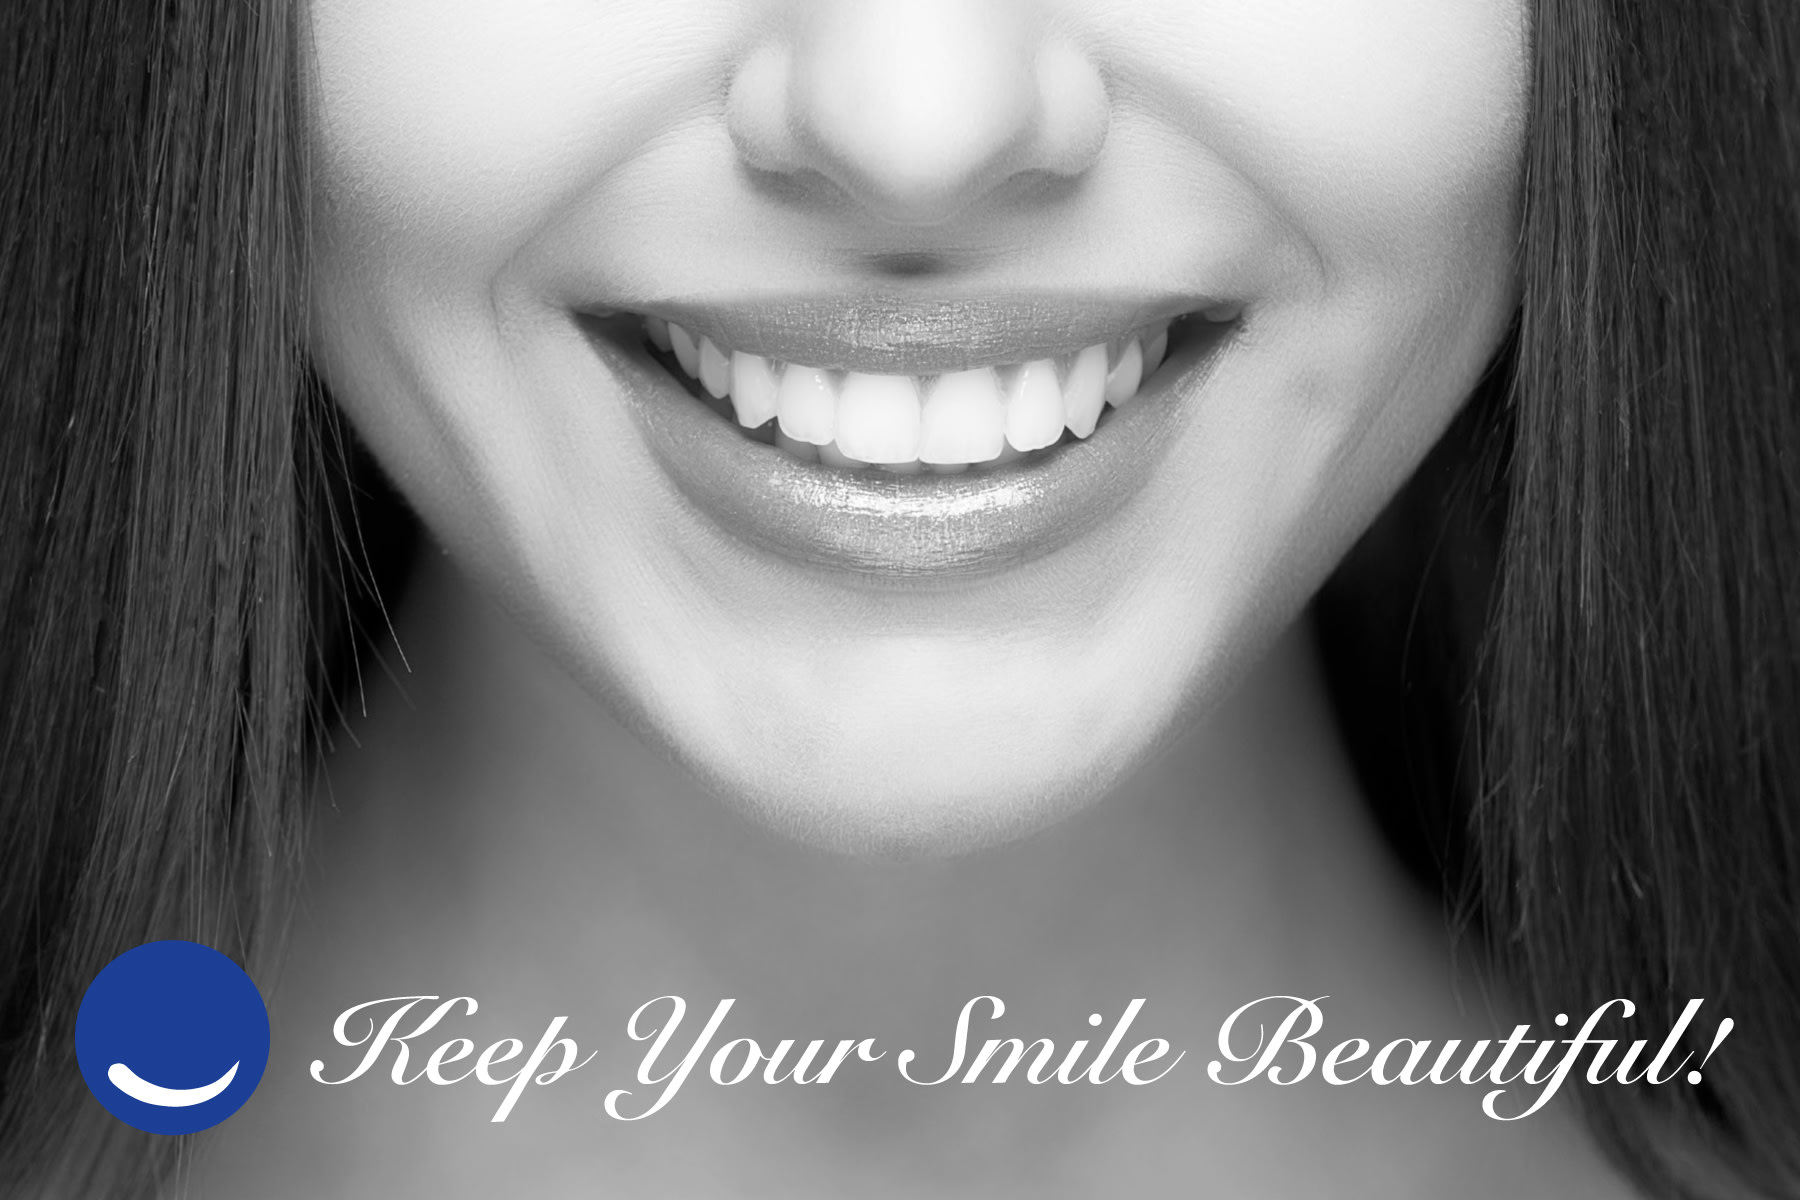 Keep Your Smile Beautiful